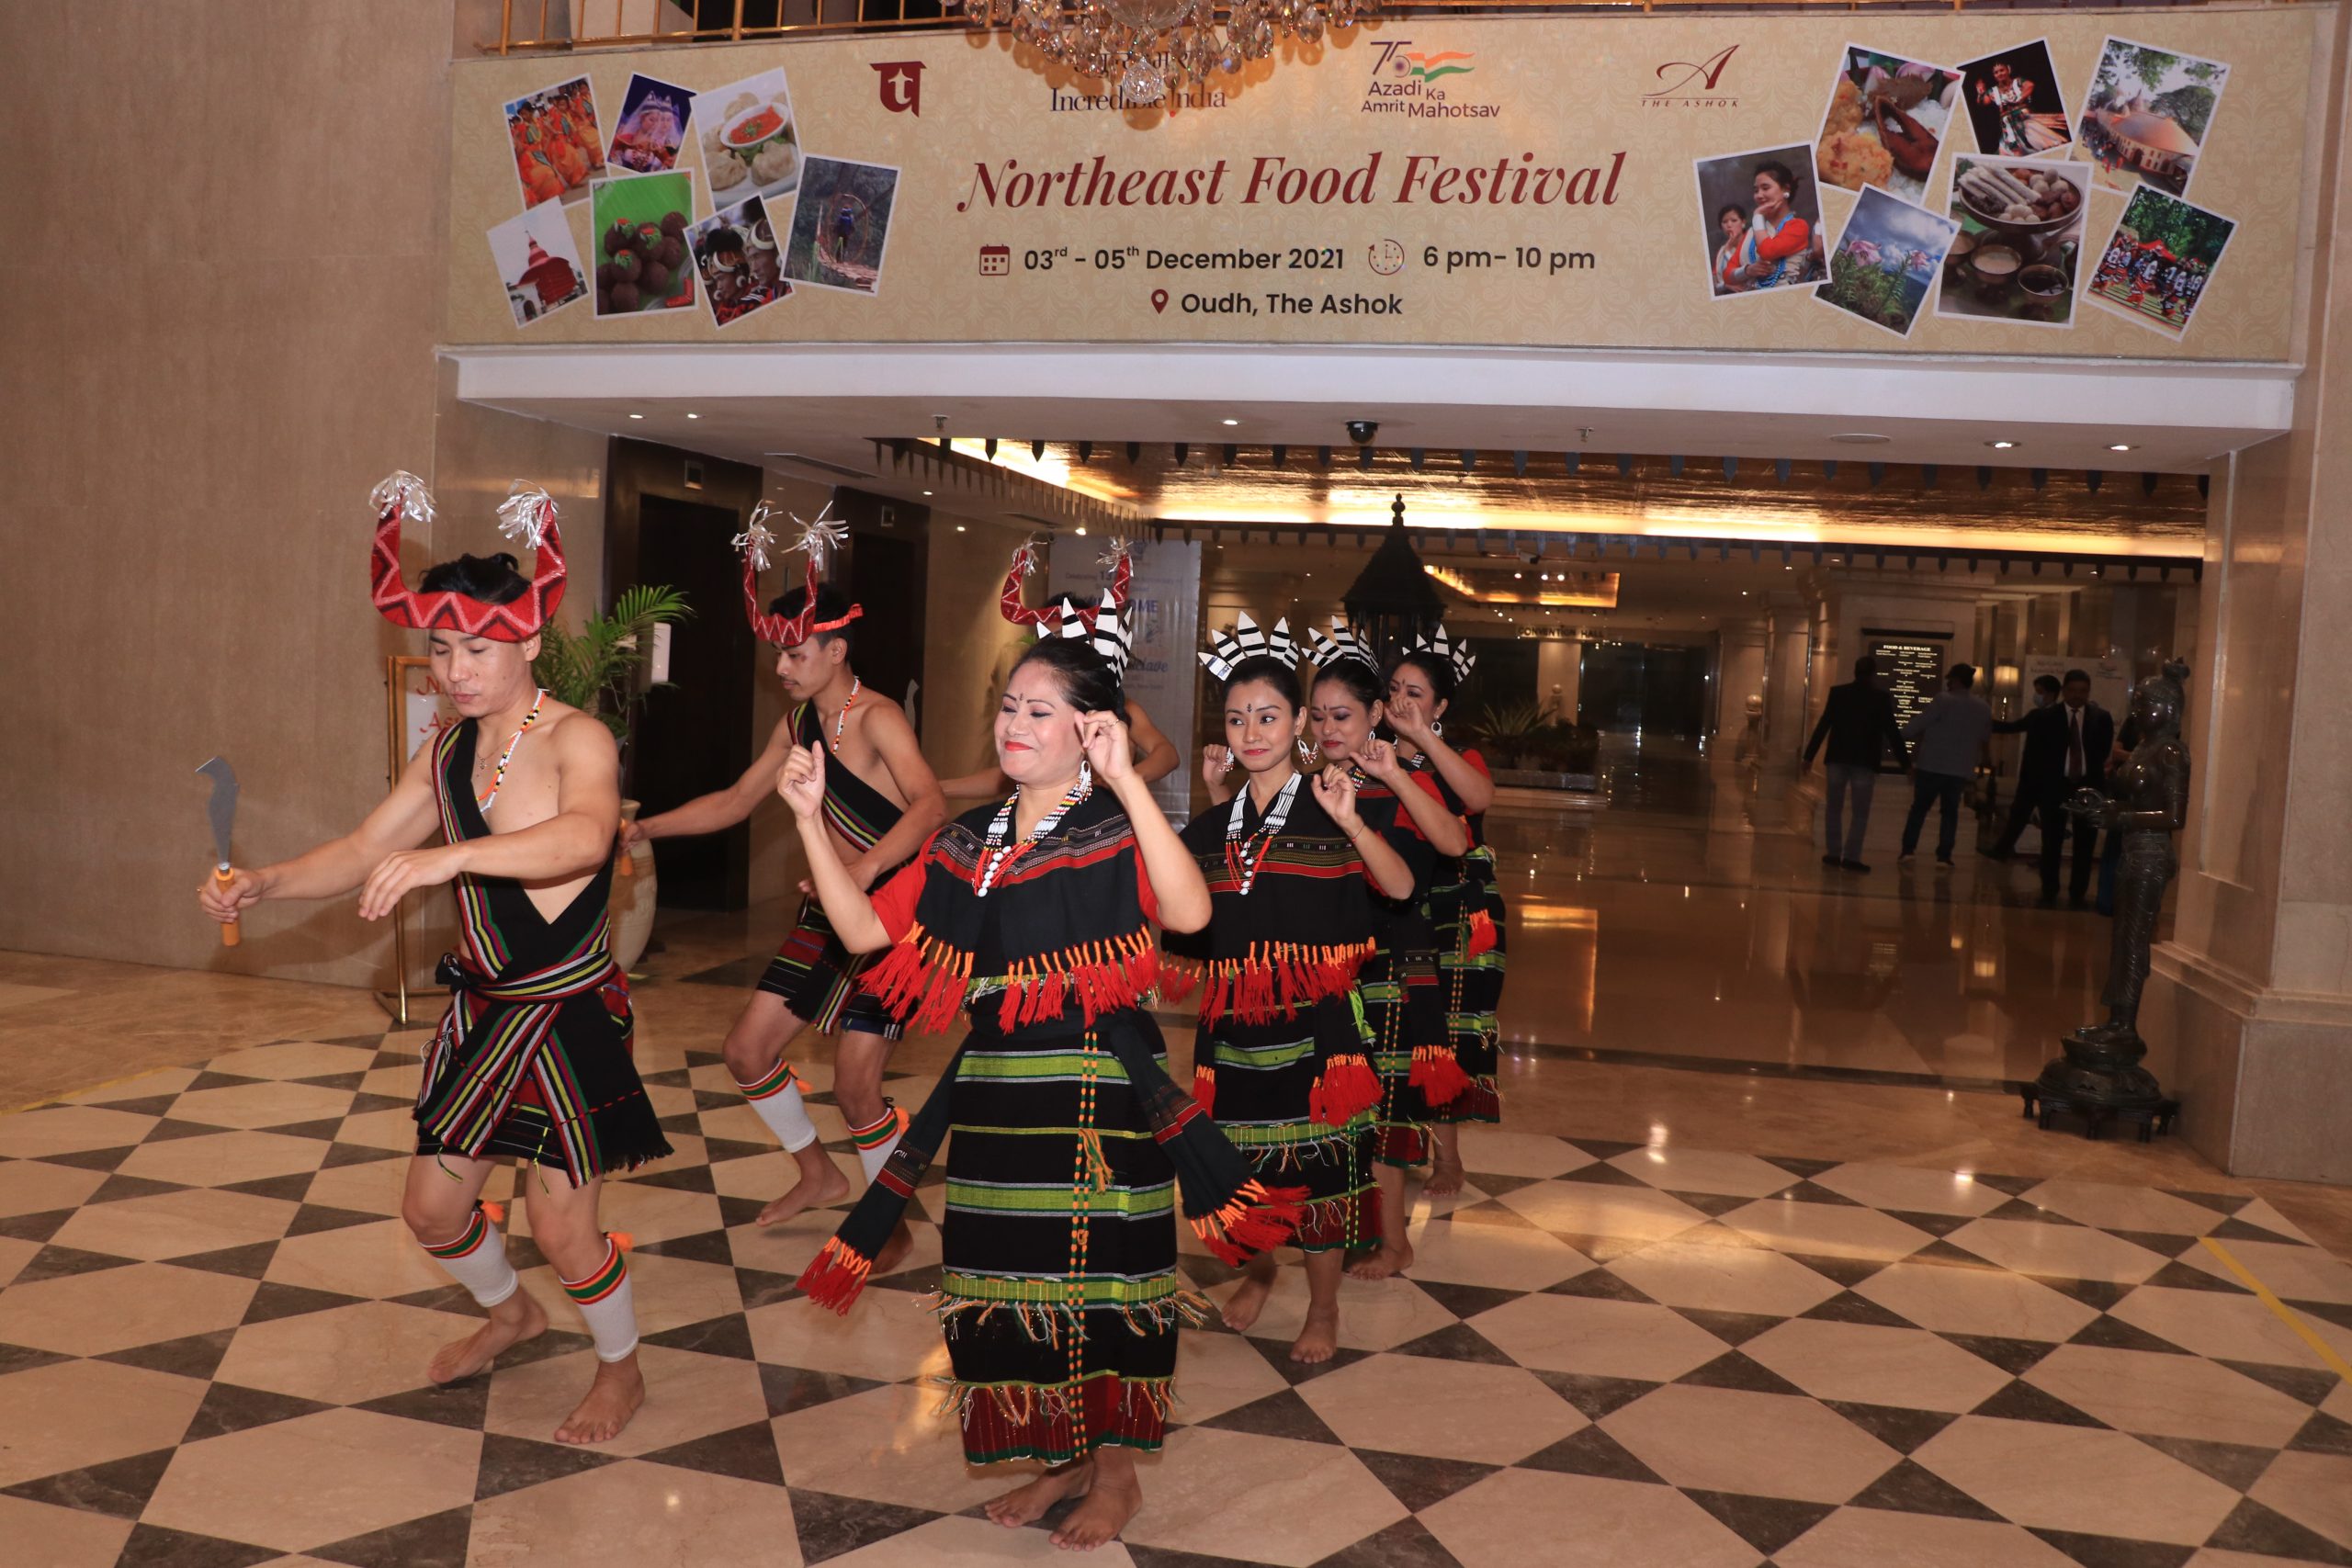 The 3 days Northeast Festival concludes at The Ashok amidst music, food, dance & unending celebrations